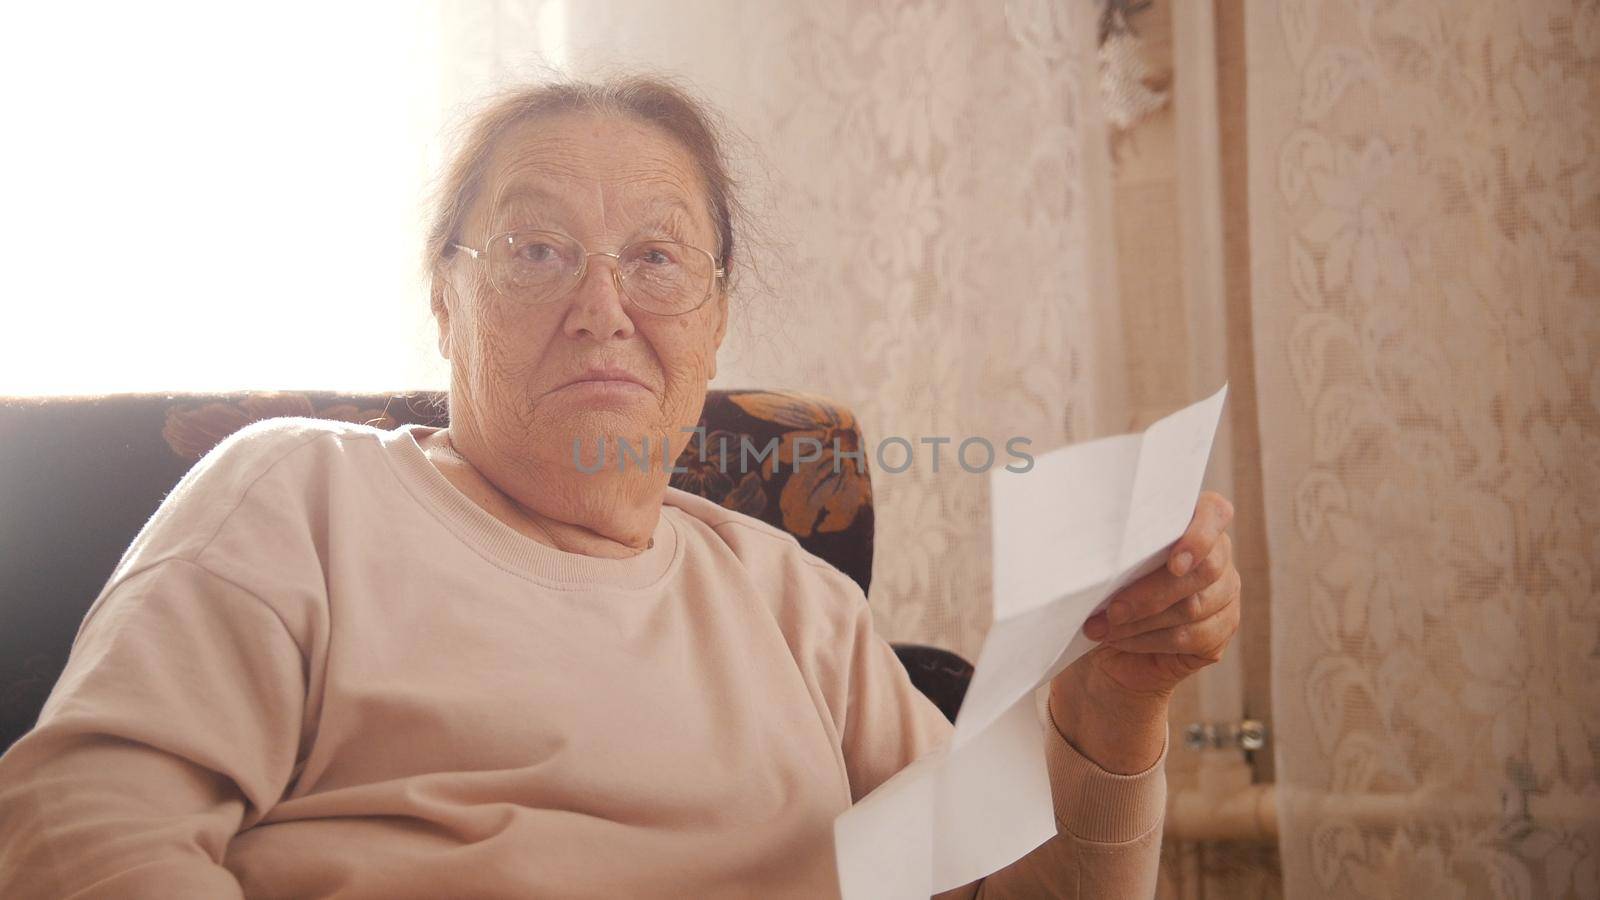 An elderly woman sitting in a chair and reading something, looking surprised not in a good way. Looking in the camera. Close up